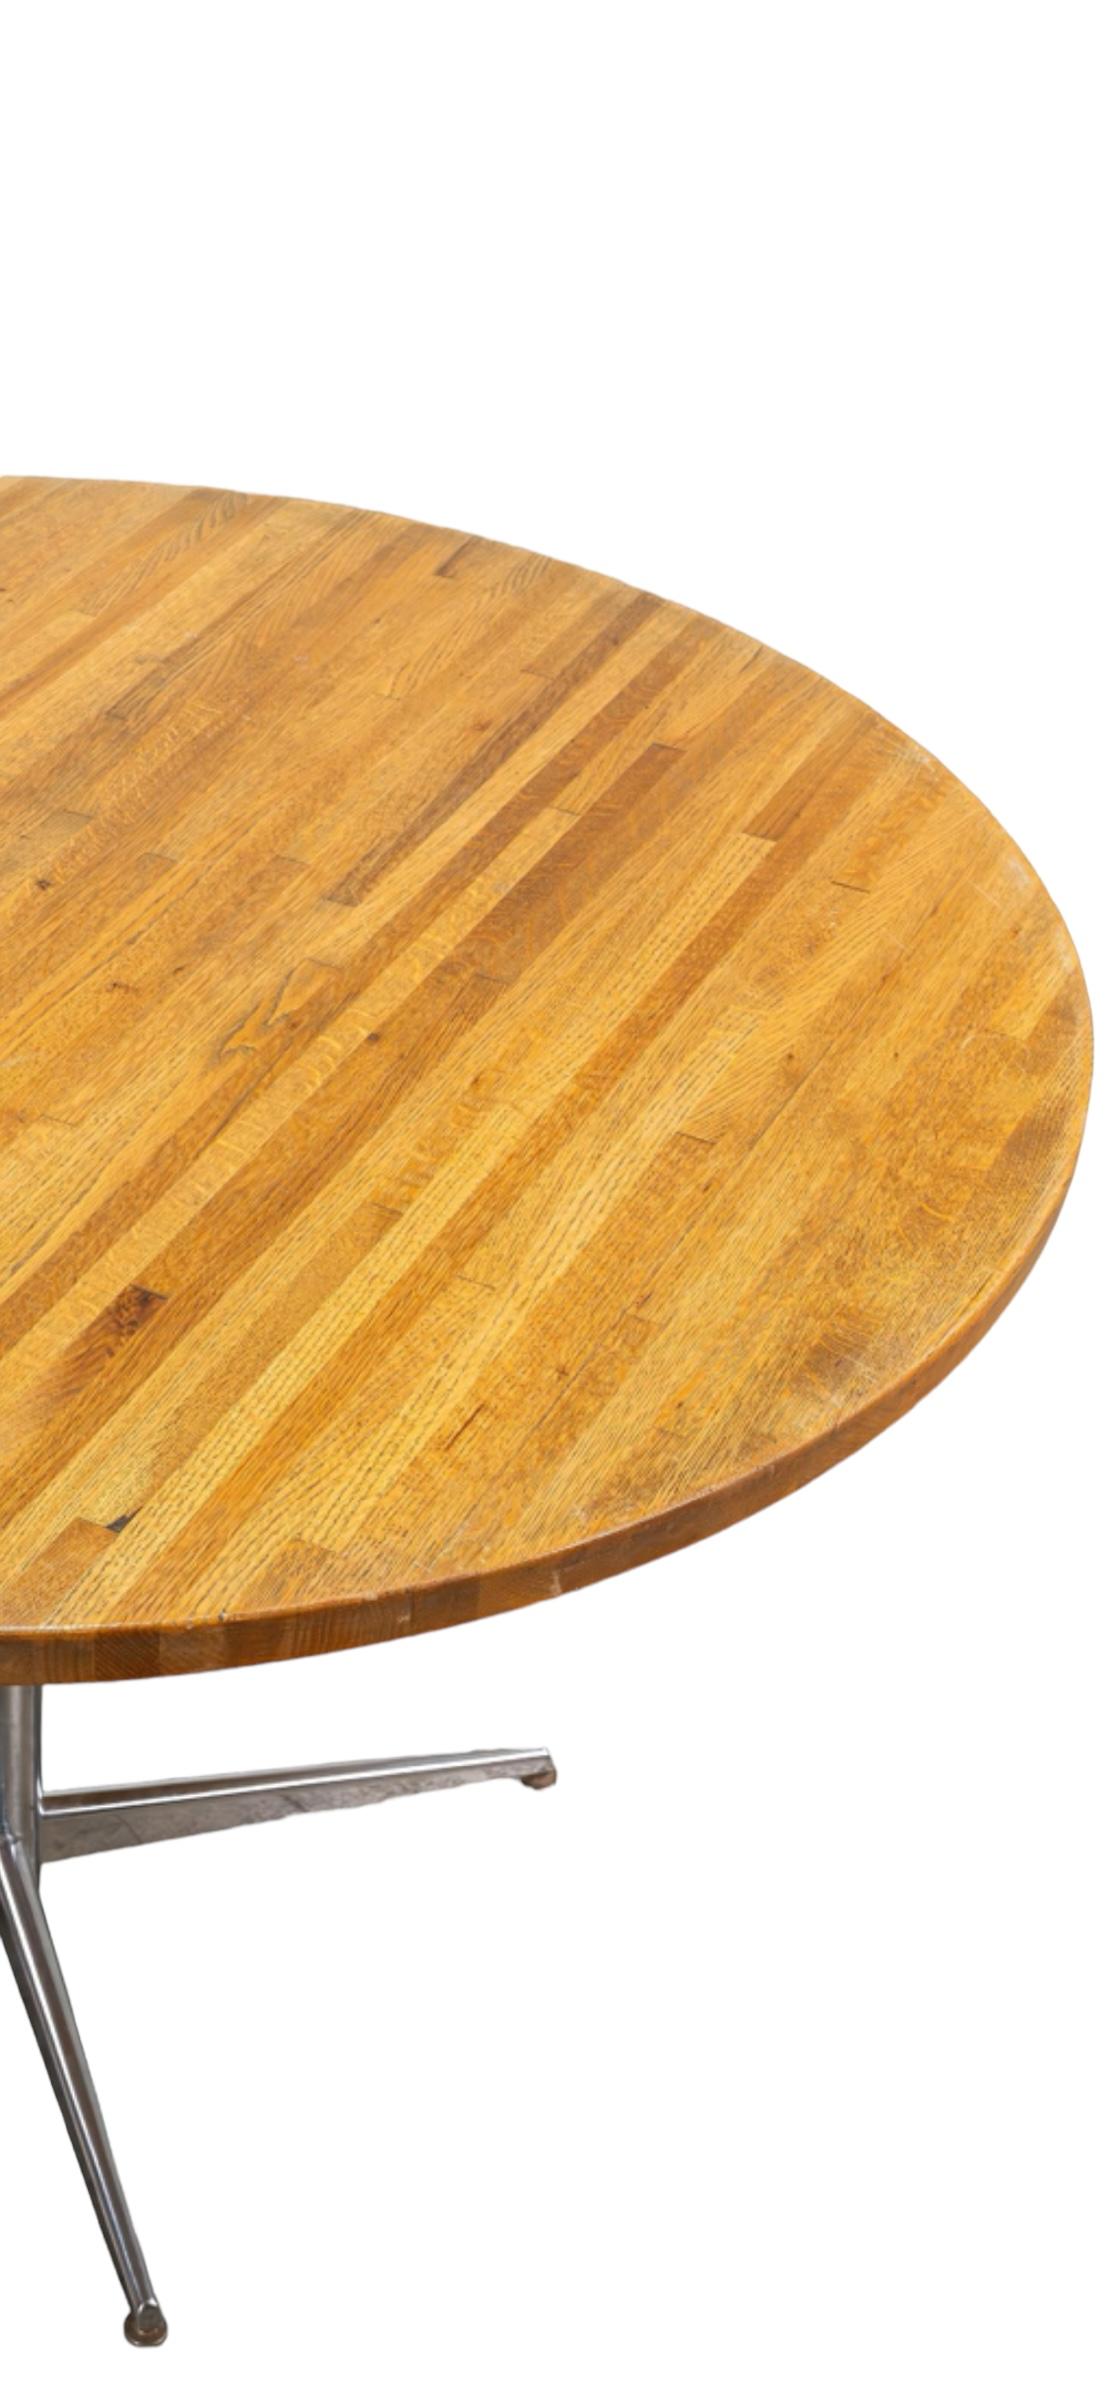 American Butcher Block 48 inch Round Kitchen Dining Table For Sale